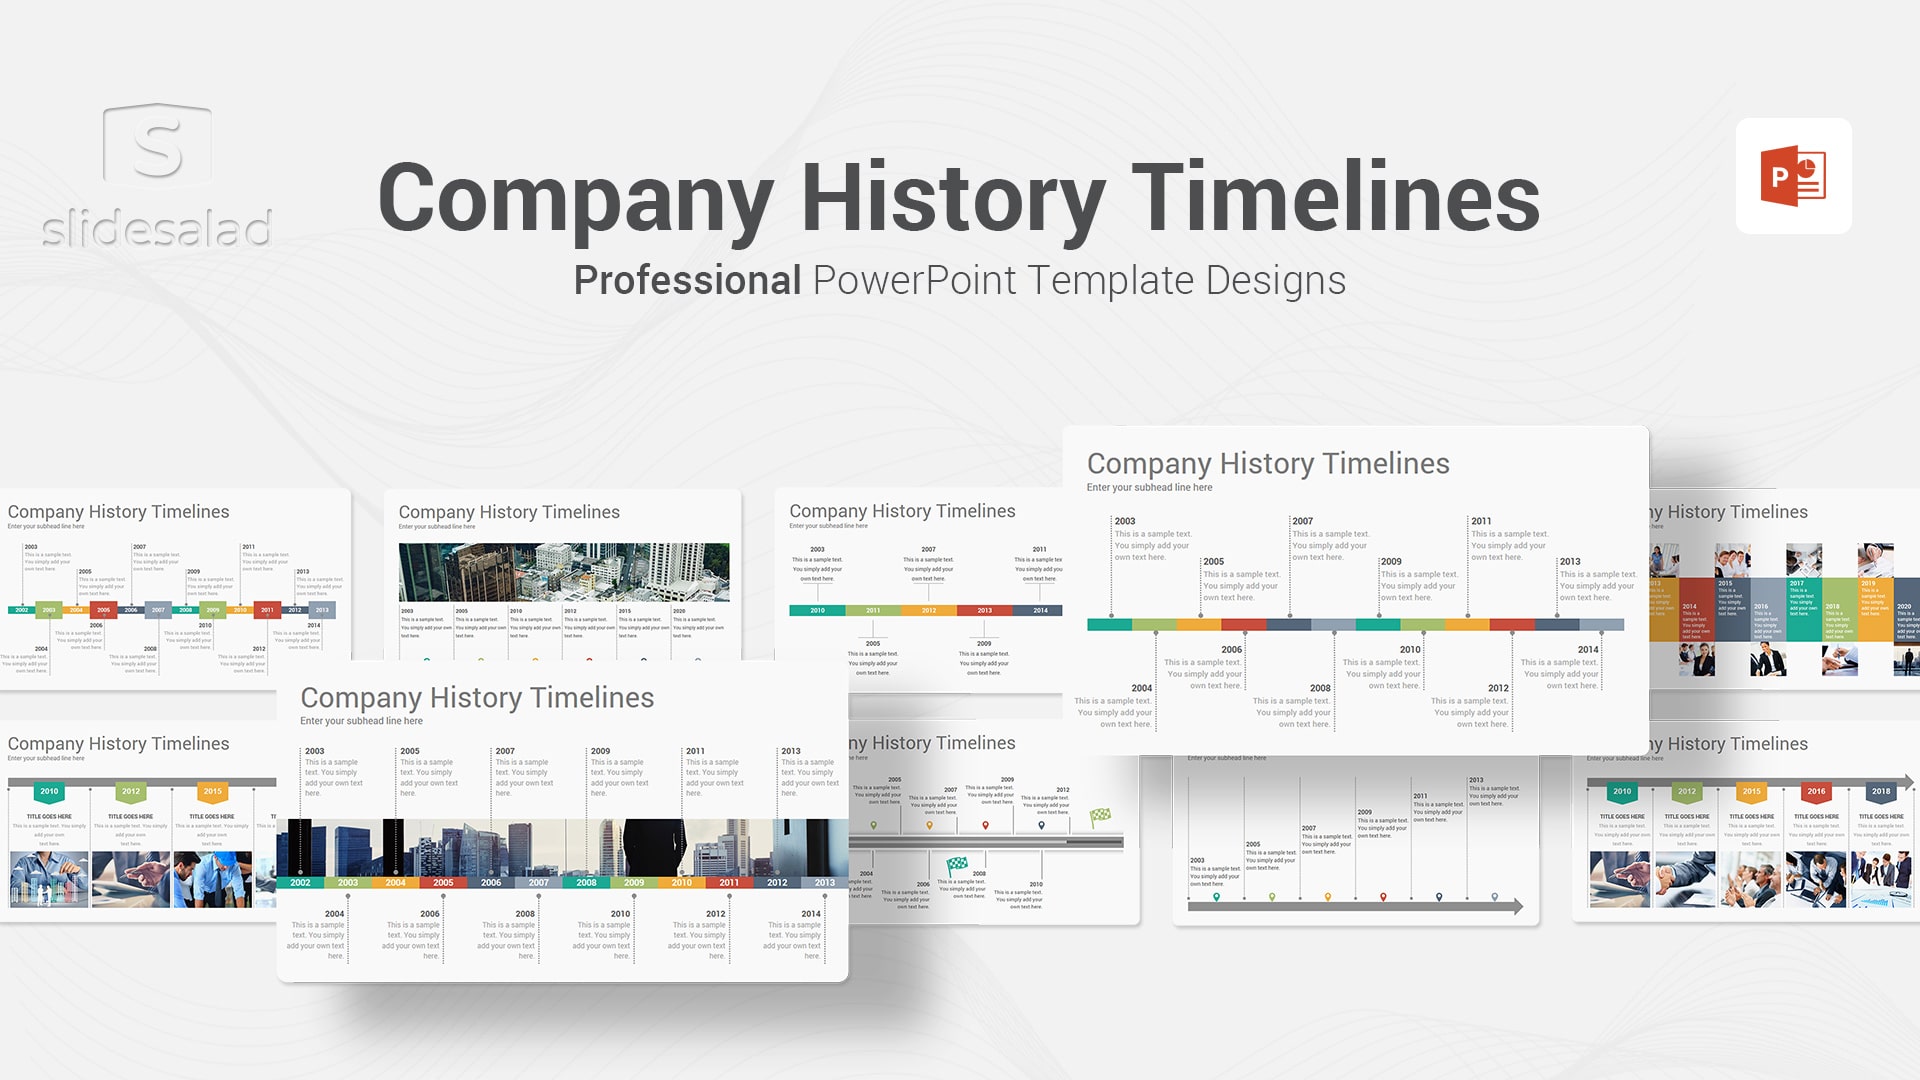 Company History Timelines Diagrams PowerPoint Presentation Template - Professional Company History Timelines Infographic Design Layouts